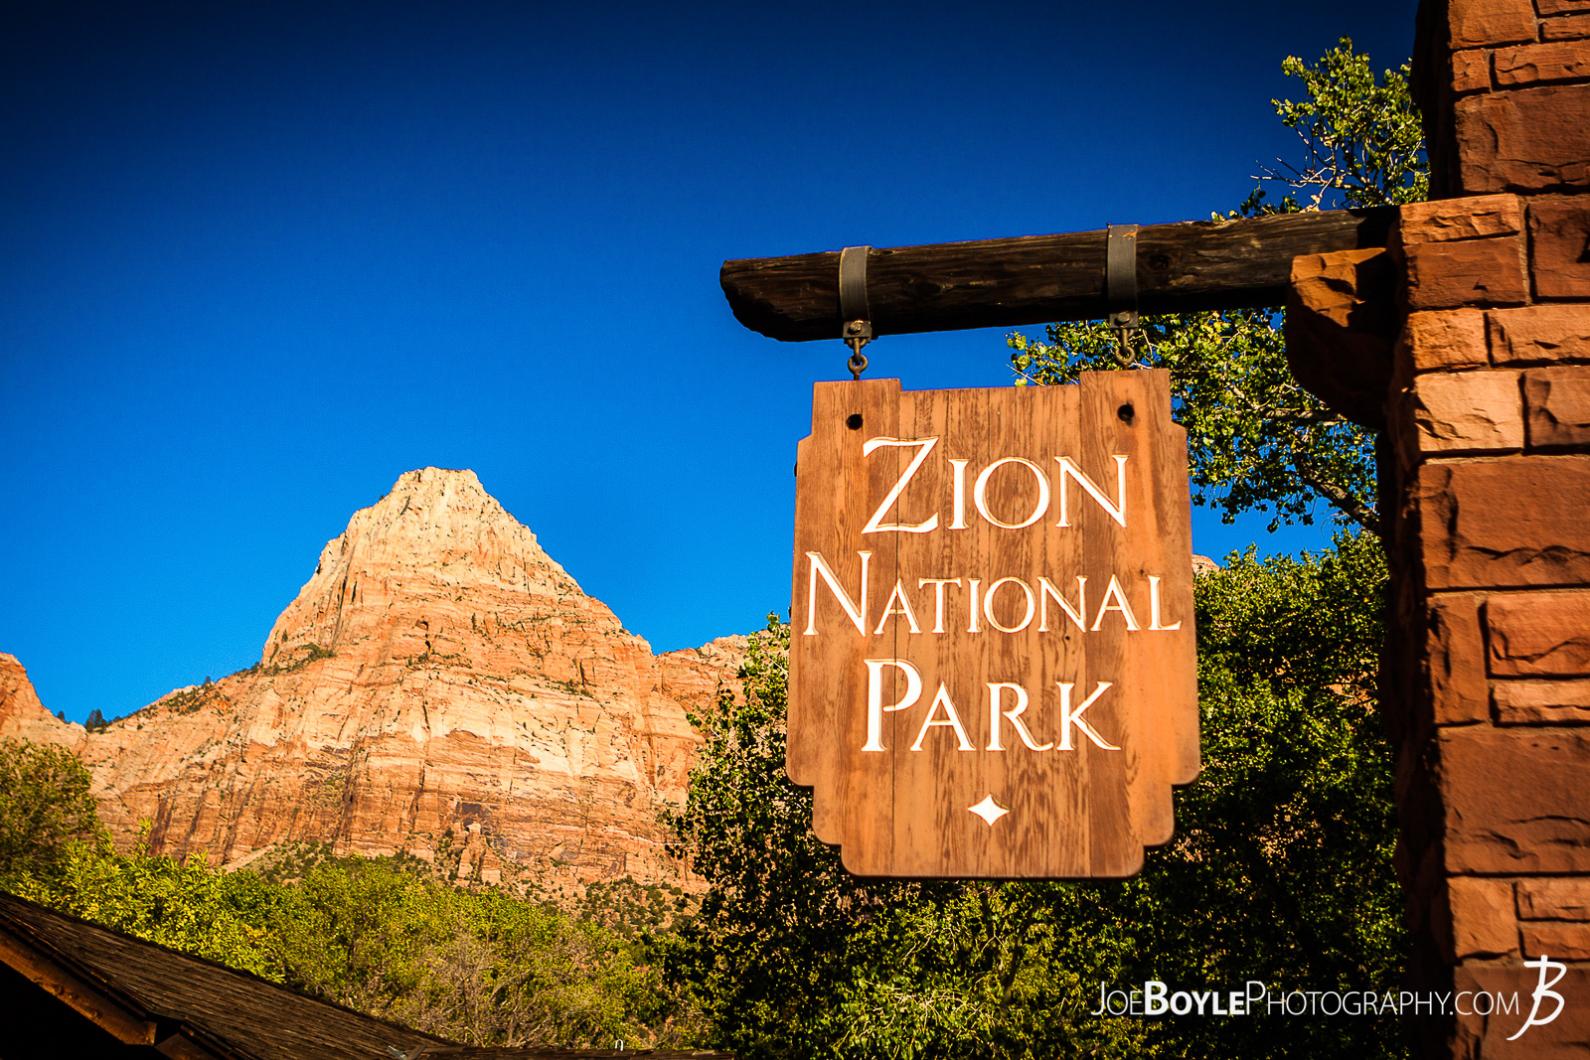 Here is a photo of the sign at the entrance of Zion National Park with a canyon in the background and a beautiful blue sky!